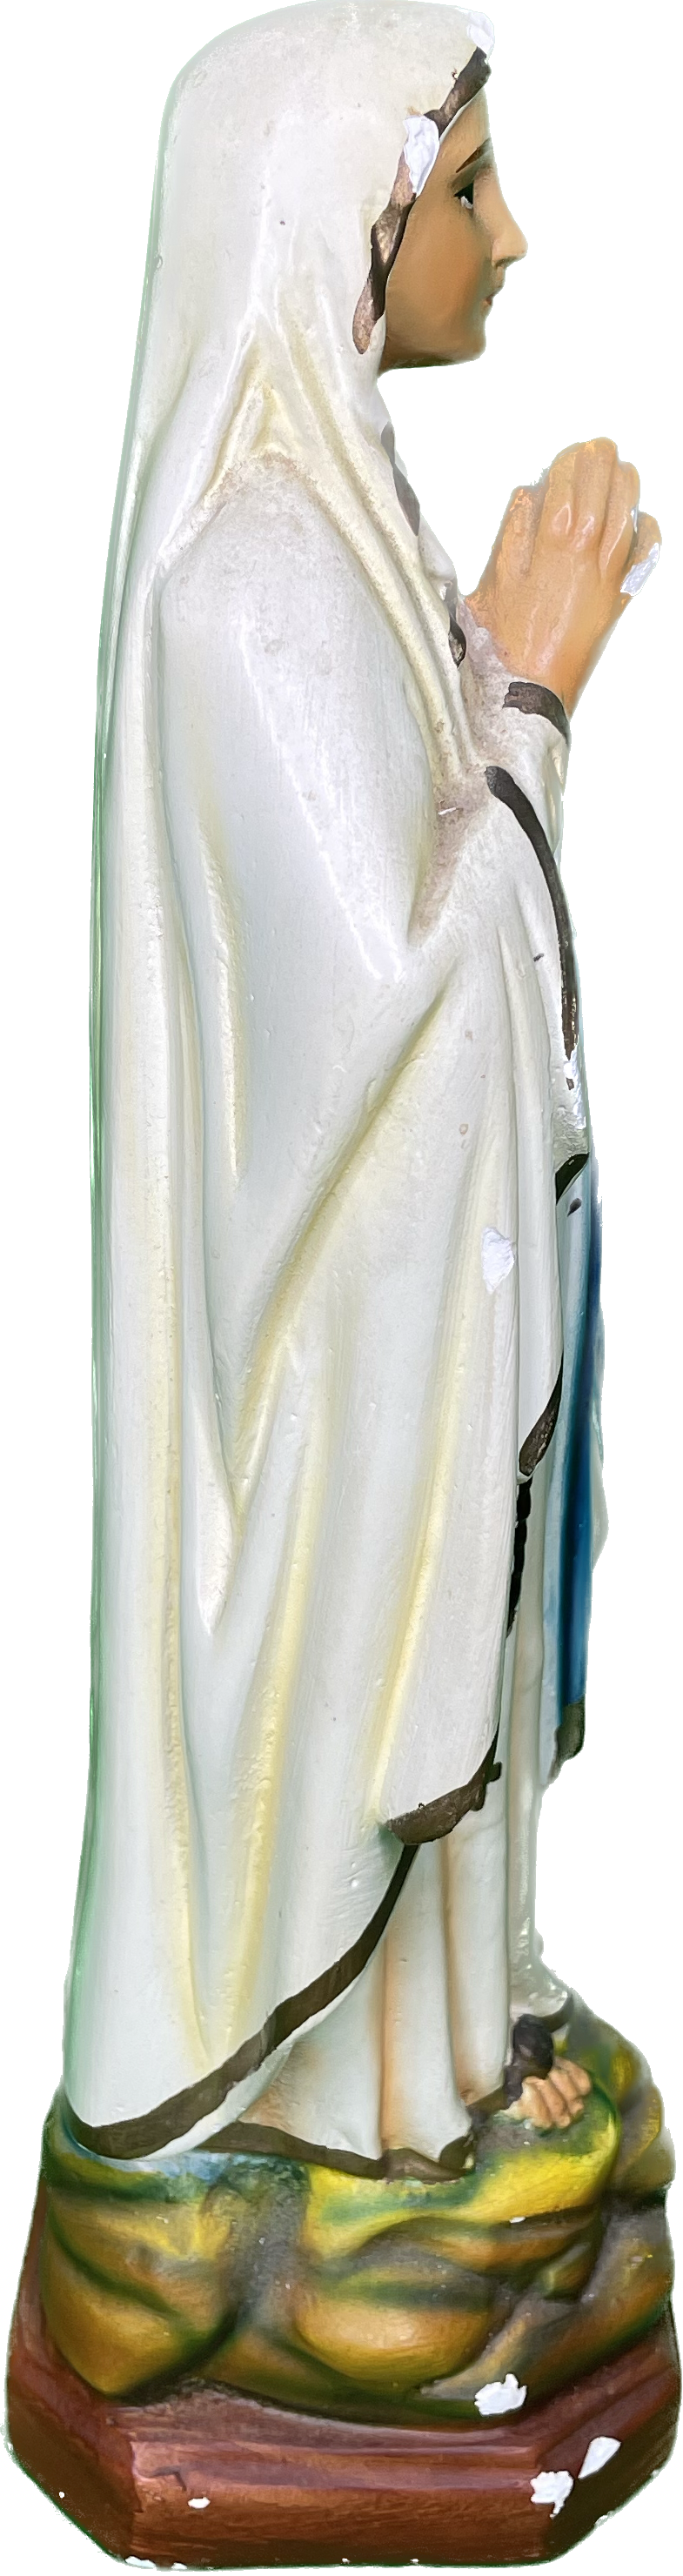 Vintage 12” Our Lady Of Fatima Virgin Mary Religious Chalkware Statue